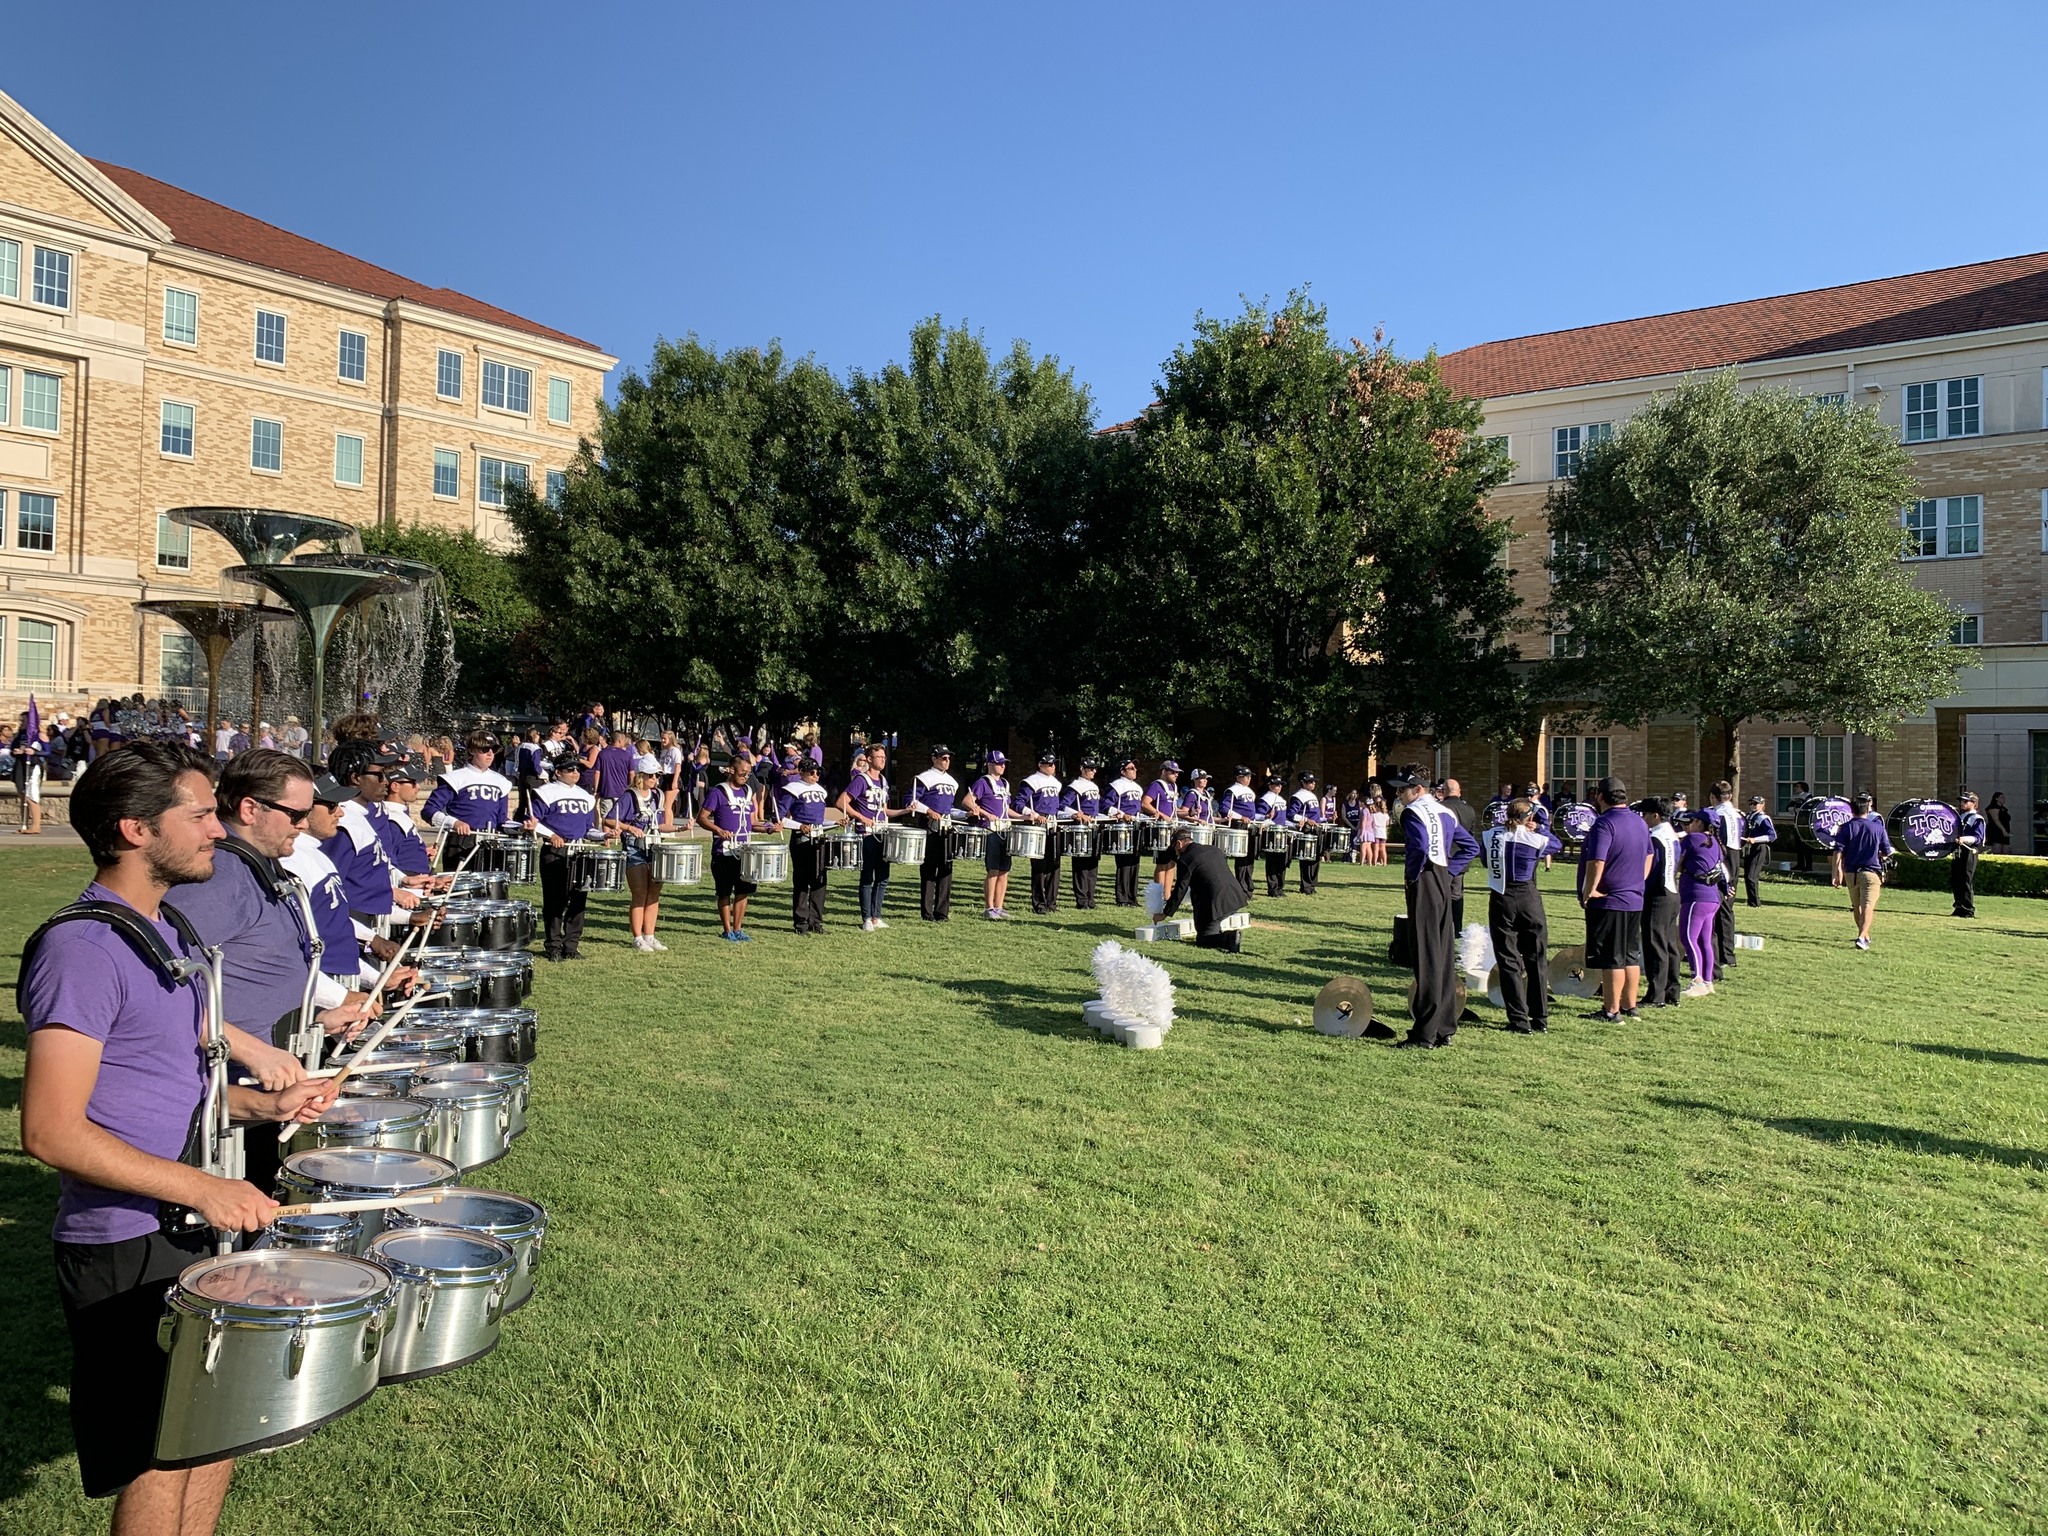 The drum line warming up with the alumni line (silver drums) before the Tarleton State game